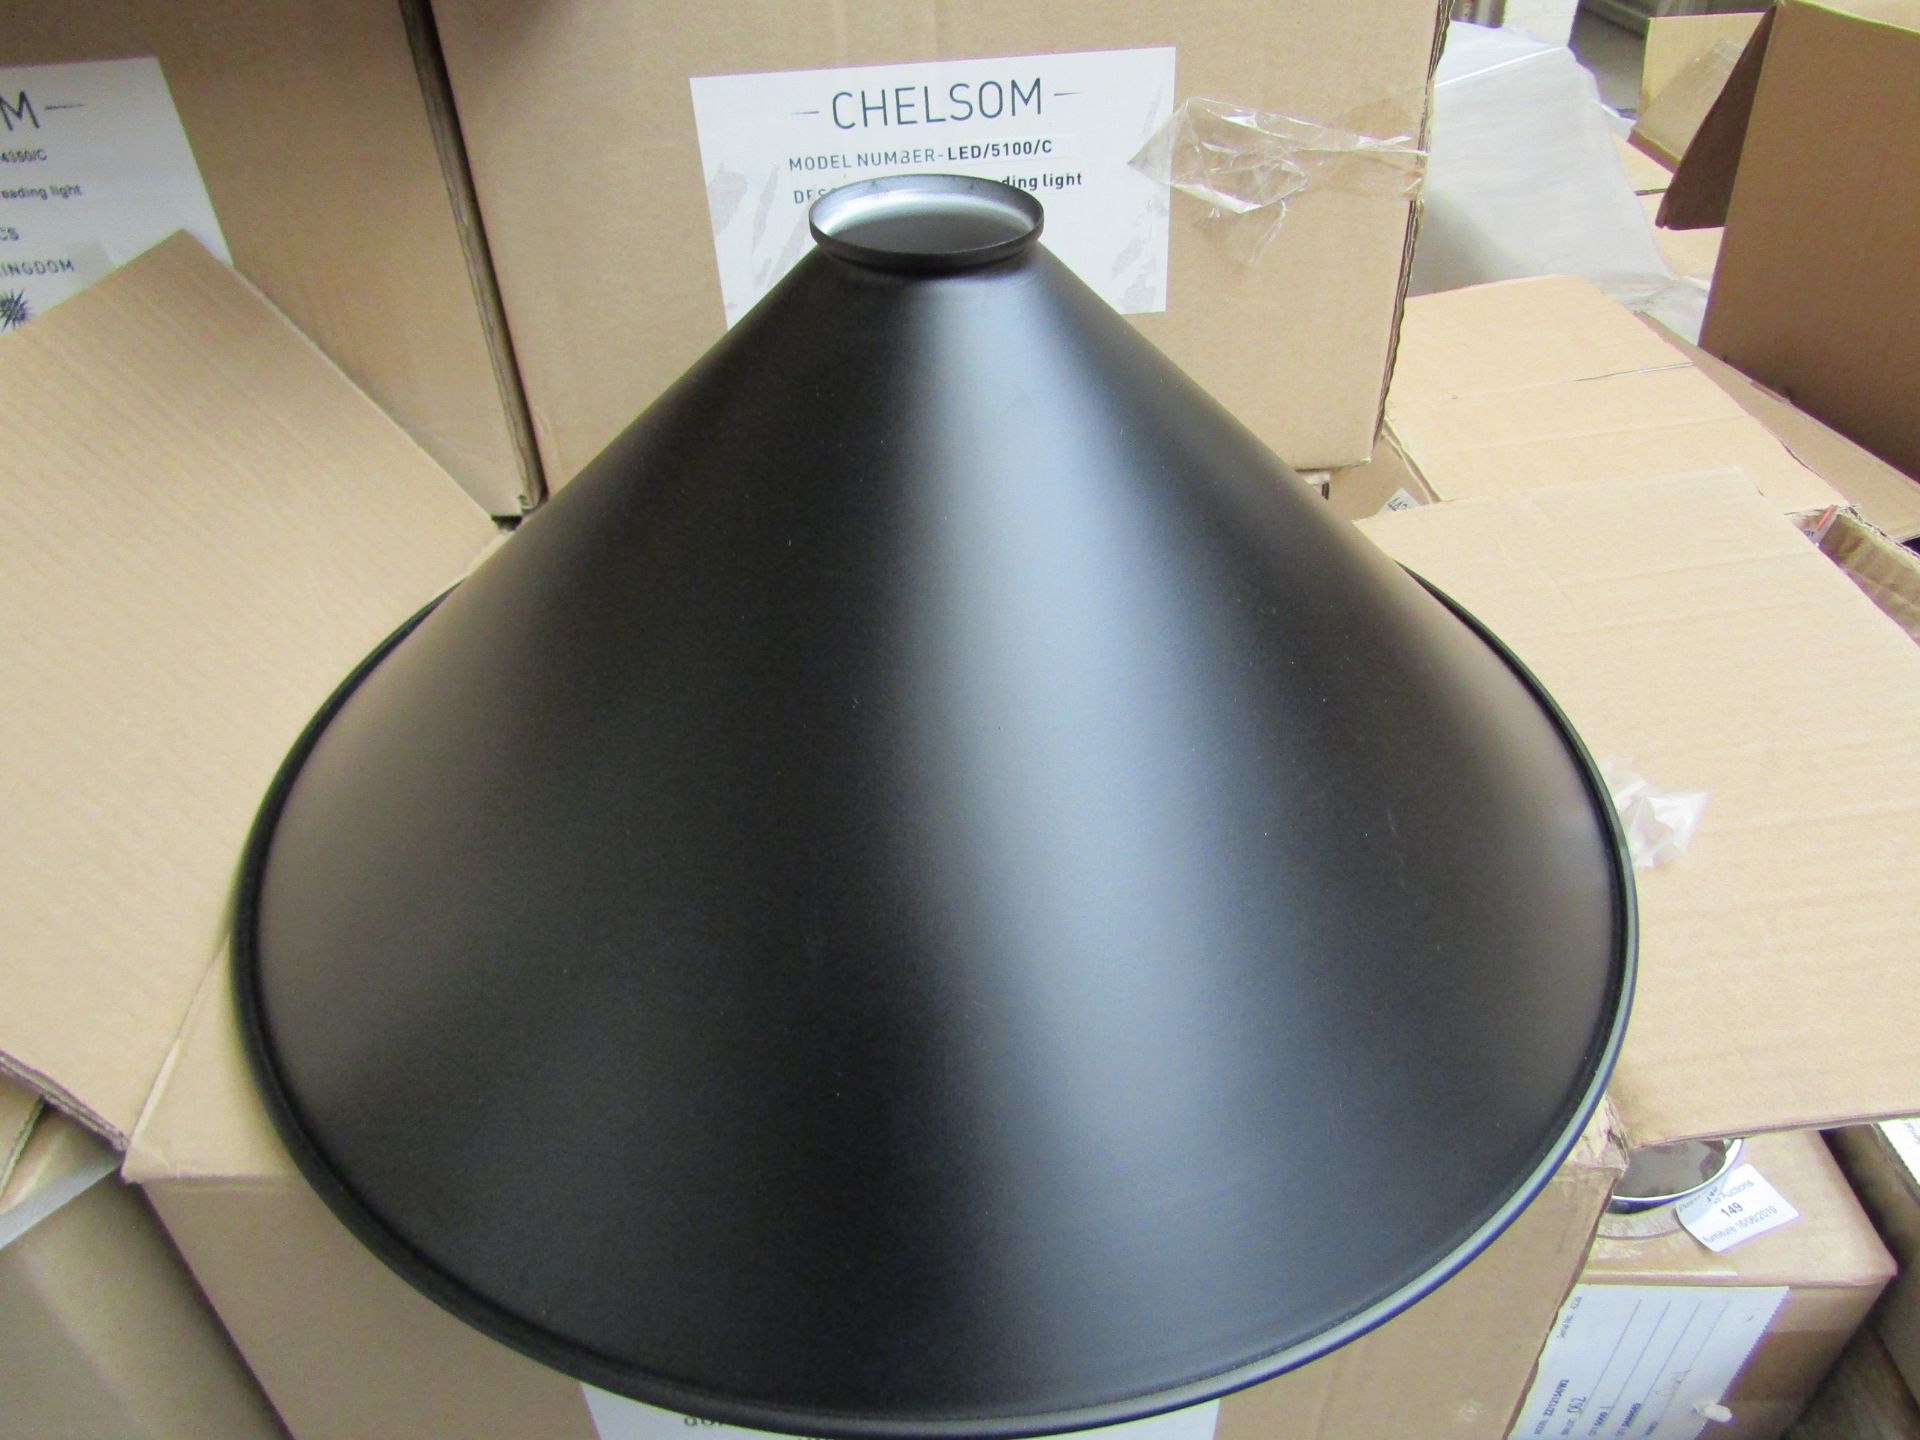 4x Chelsom Black metal pendant light shades with white linings, unused